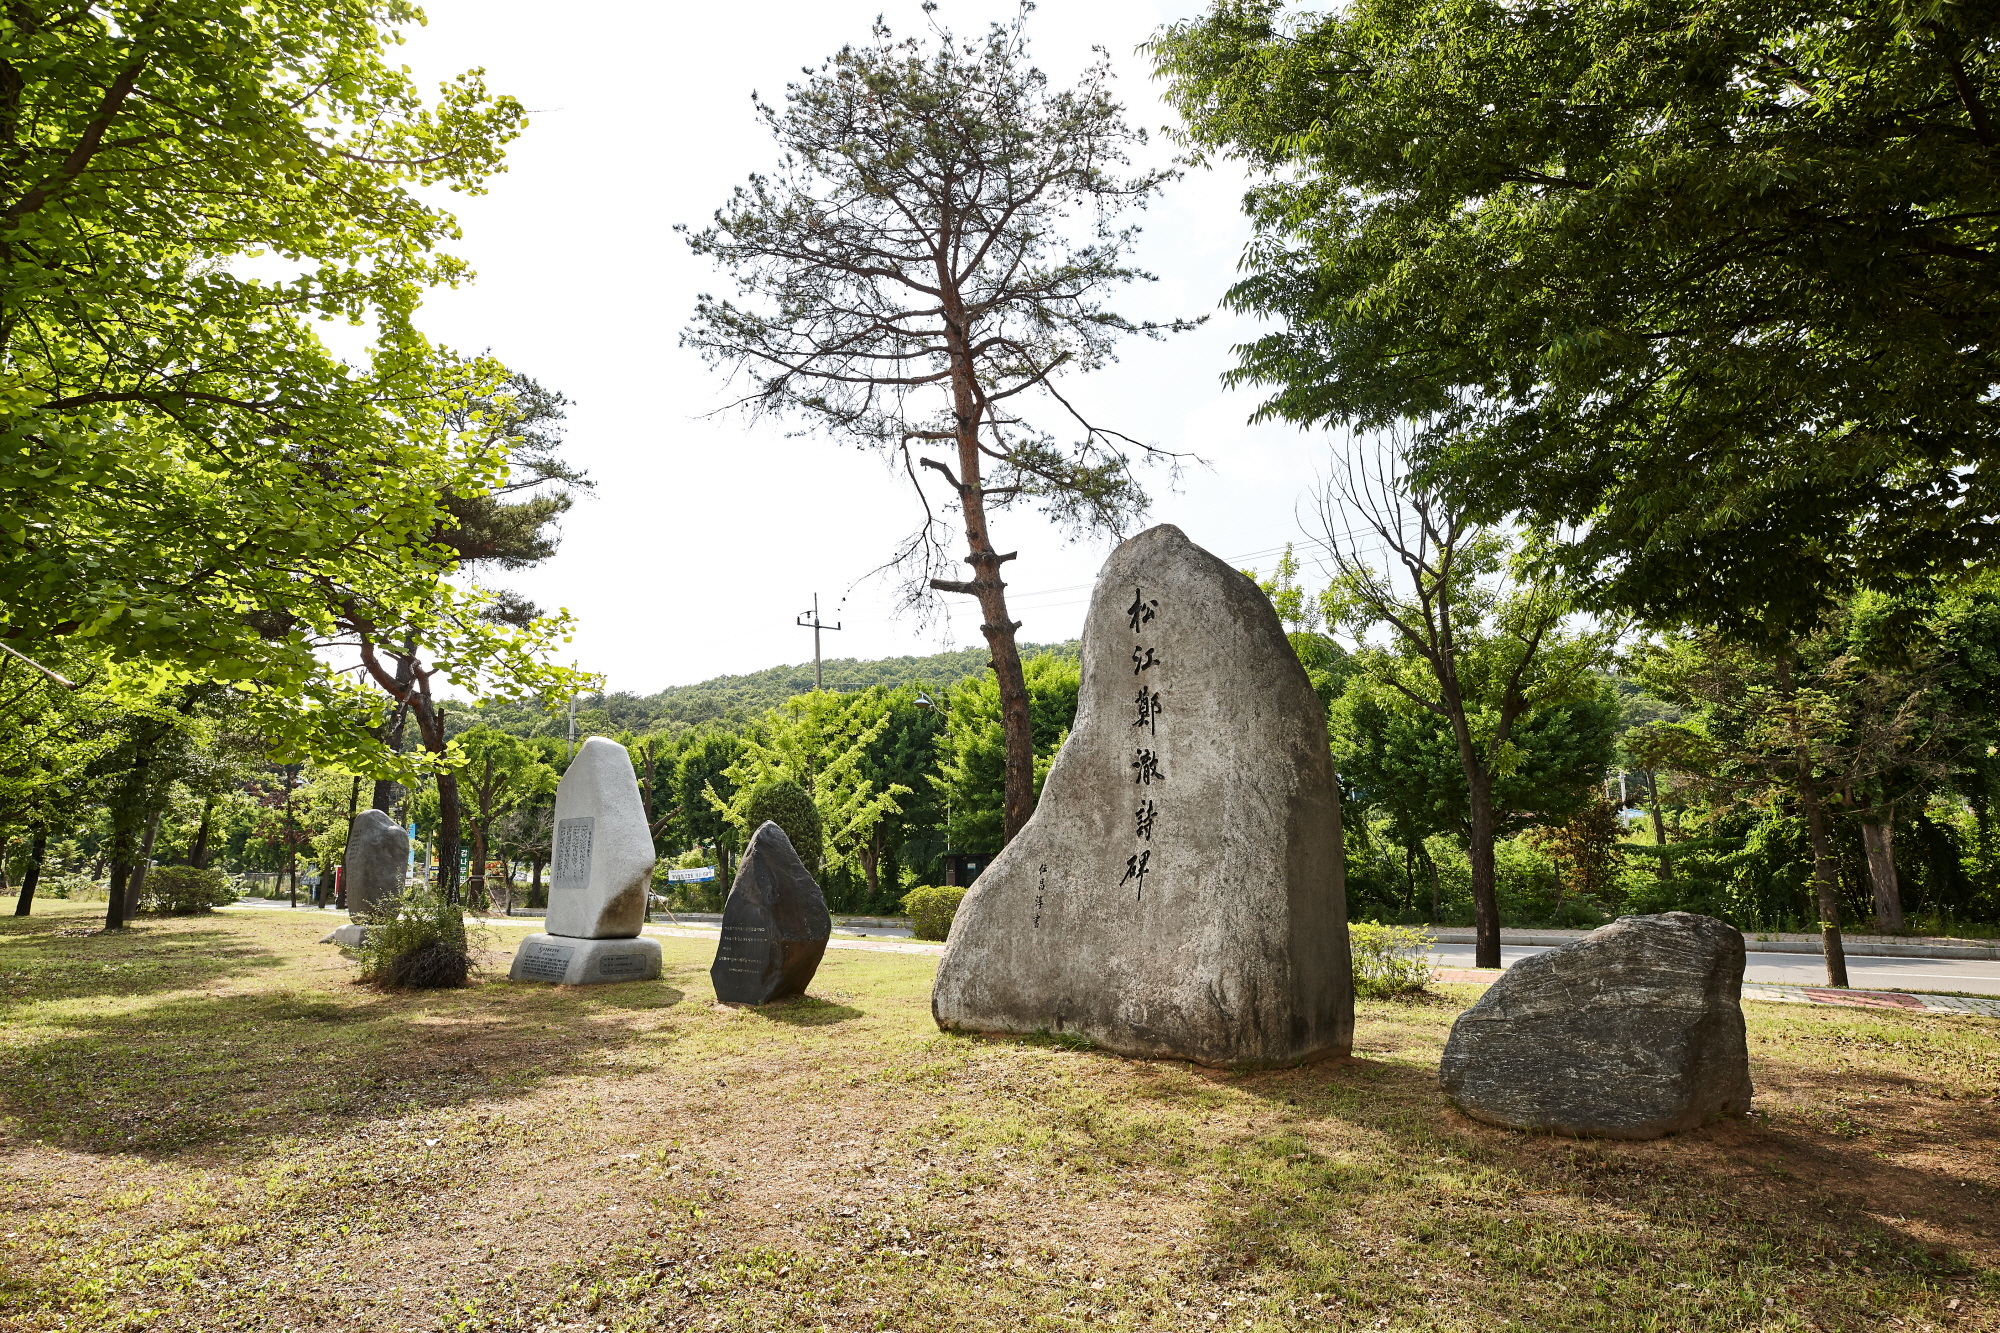 The place where Songgang Jungchul stayed, Songgang Village 